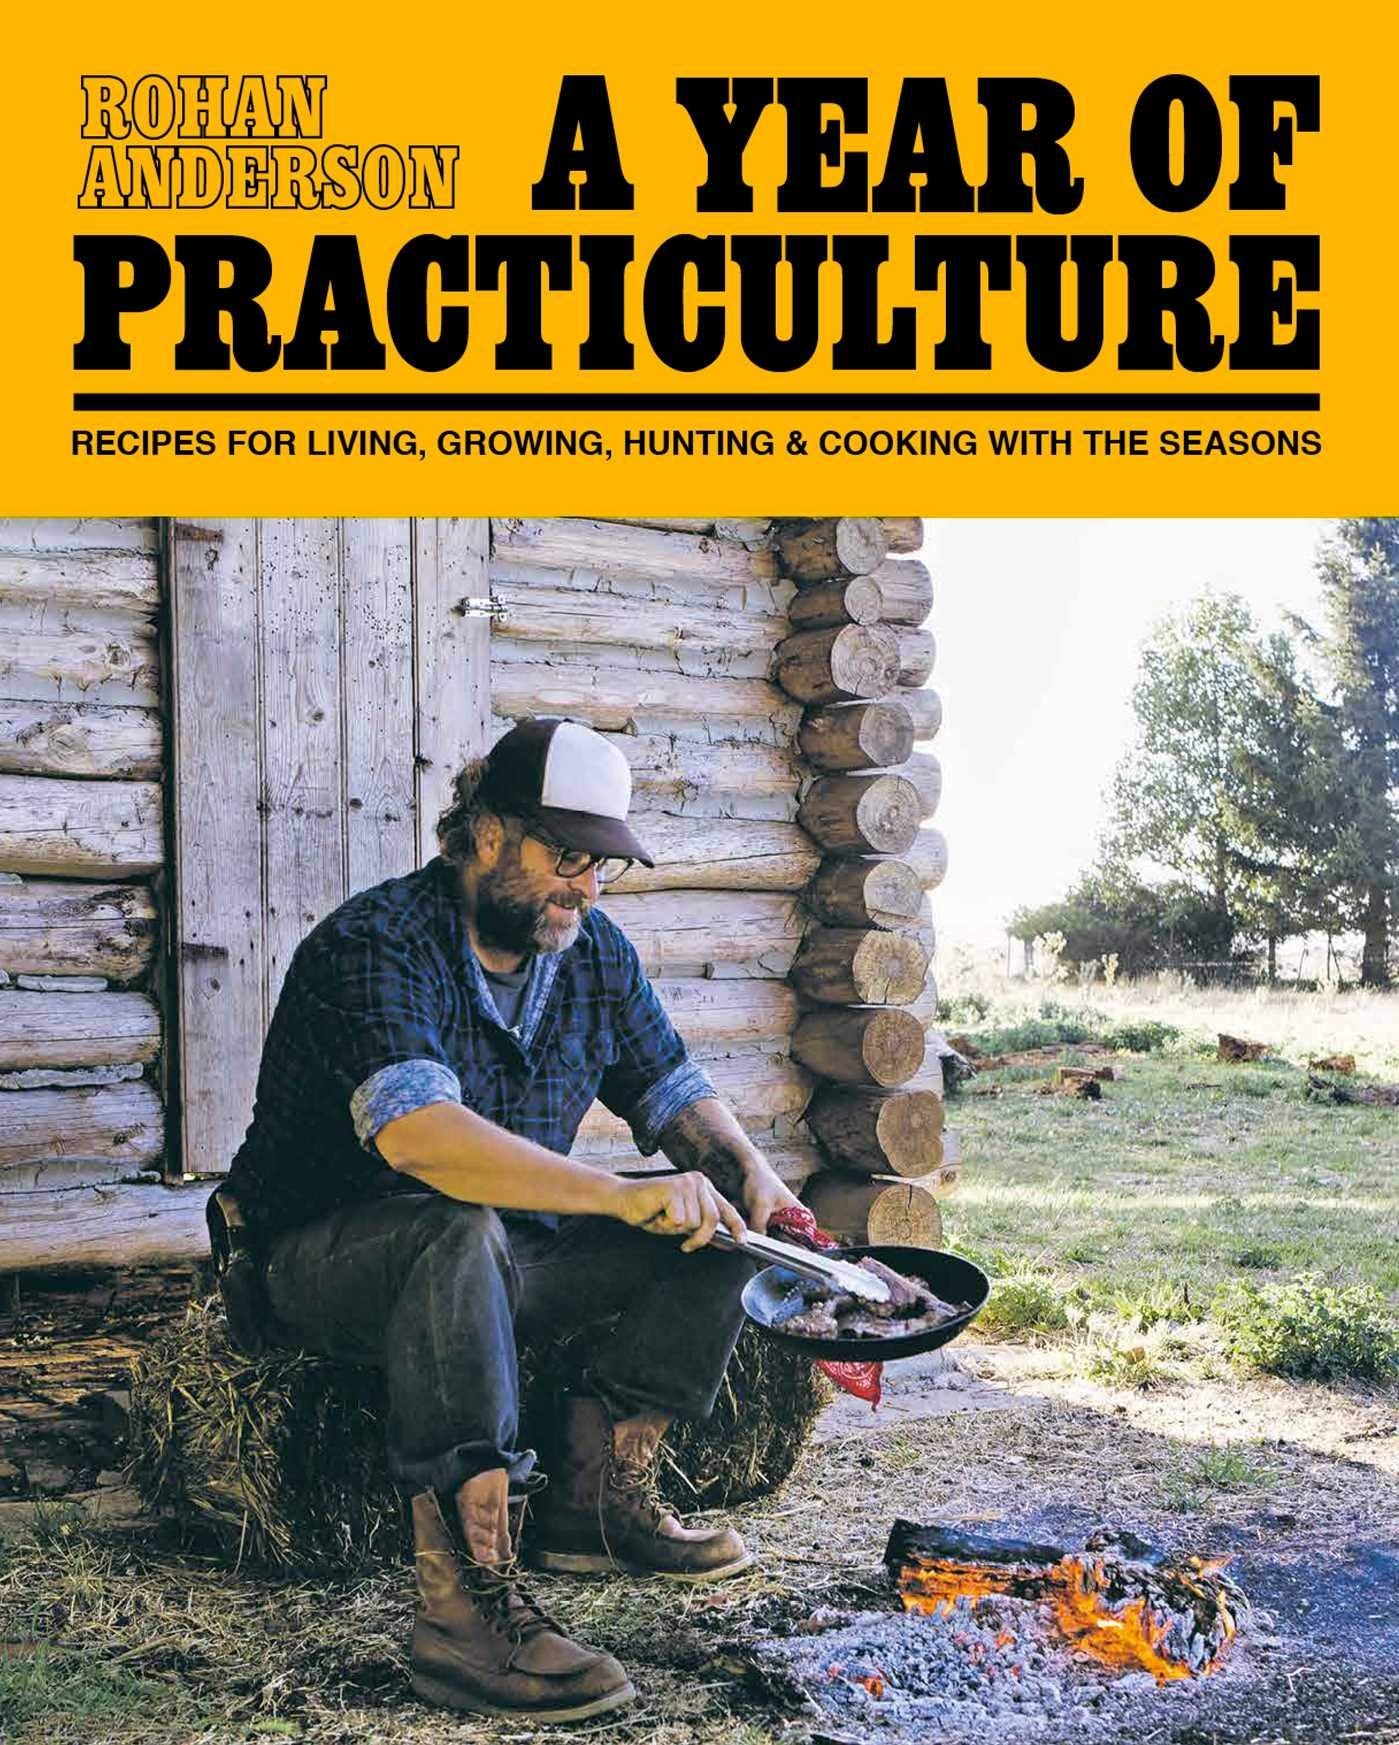 A Year of Practiculture: Recipes for Living, Growing, Hunting & Cooking with The Seasons (Rohan Anderson)